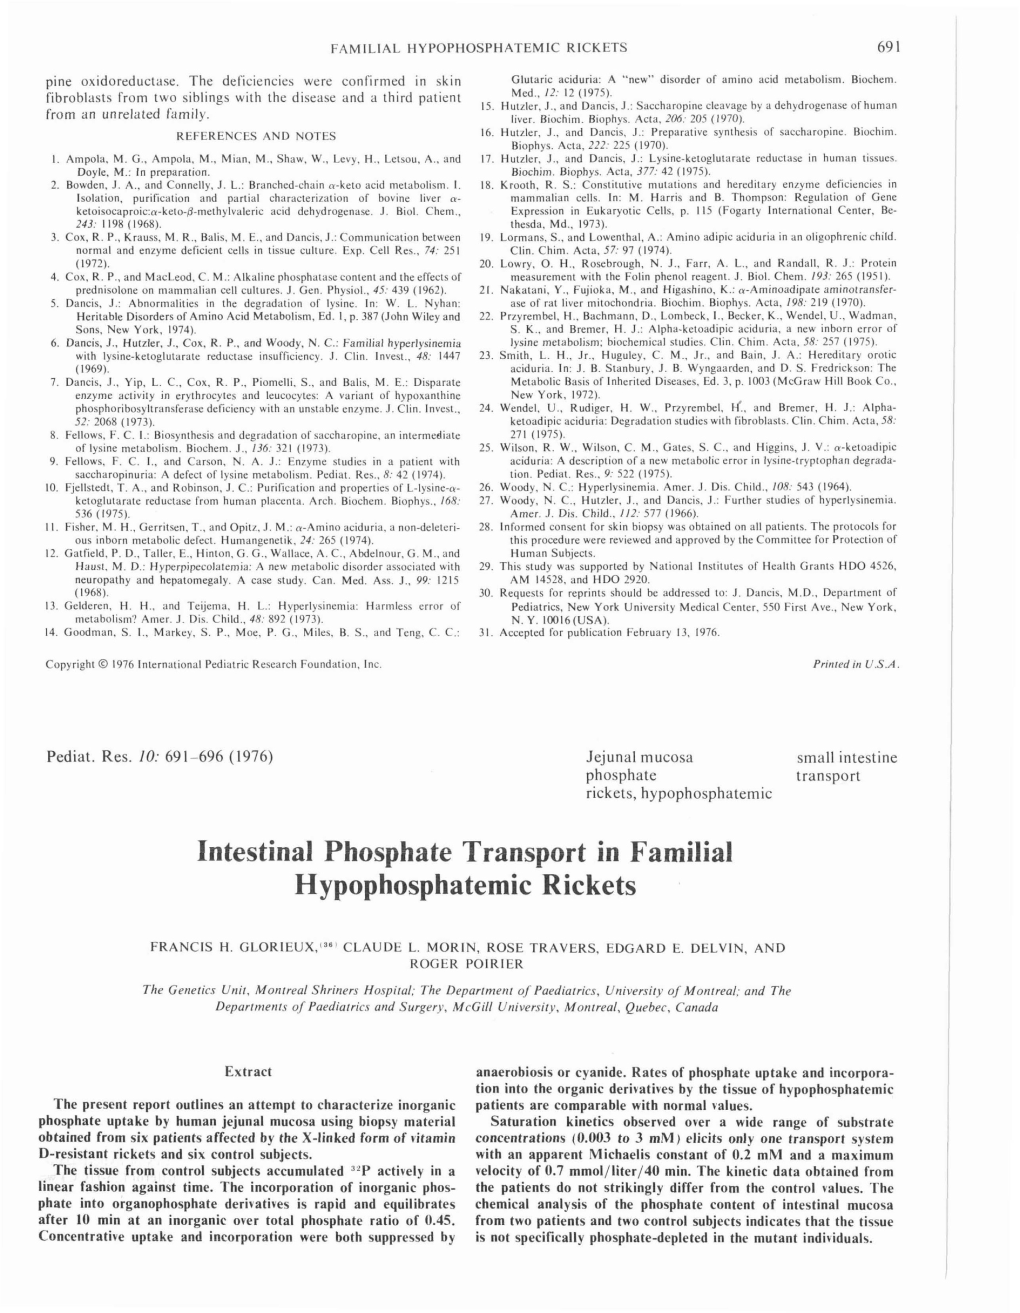 Intestinal Phosphate Transport in Familial ~~~O~Hos~Haternicrickets